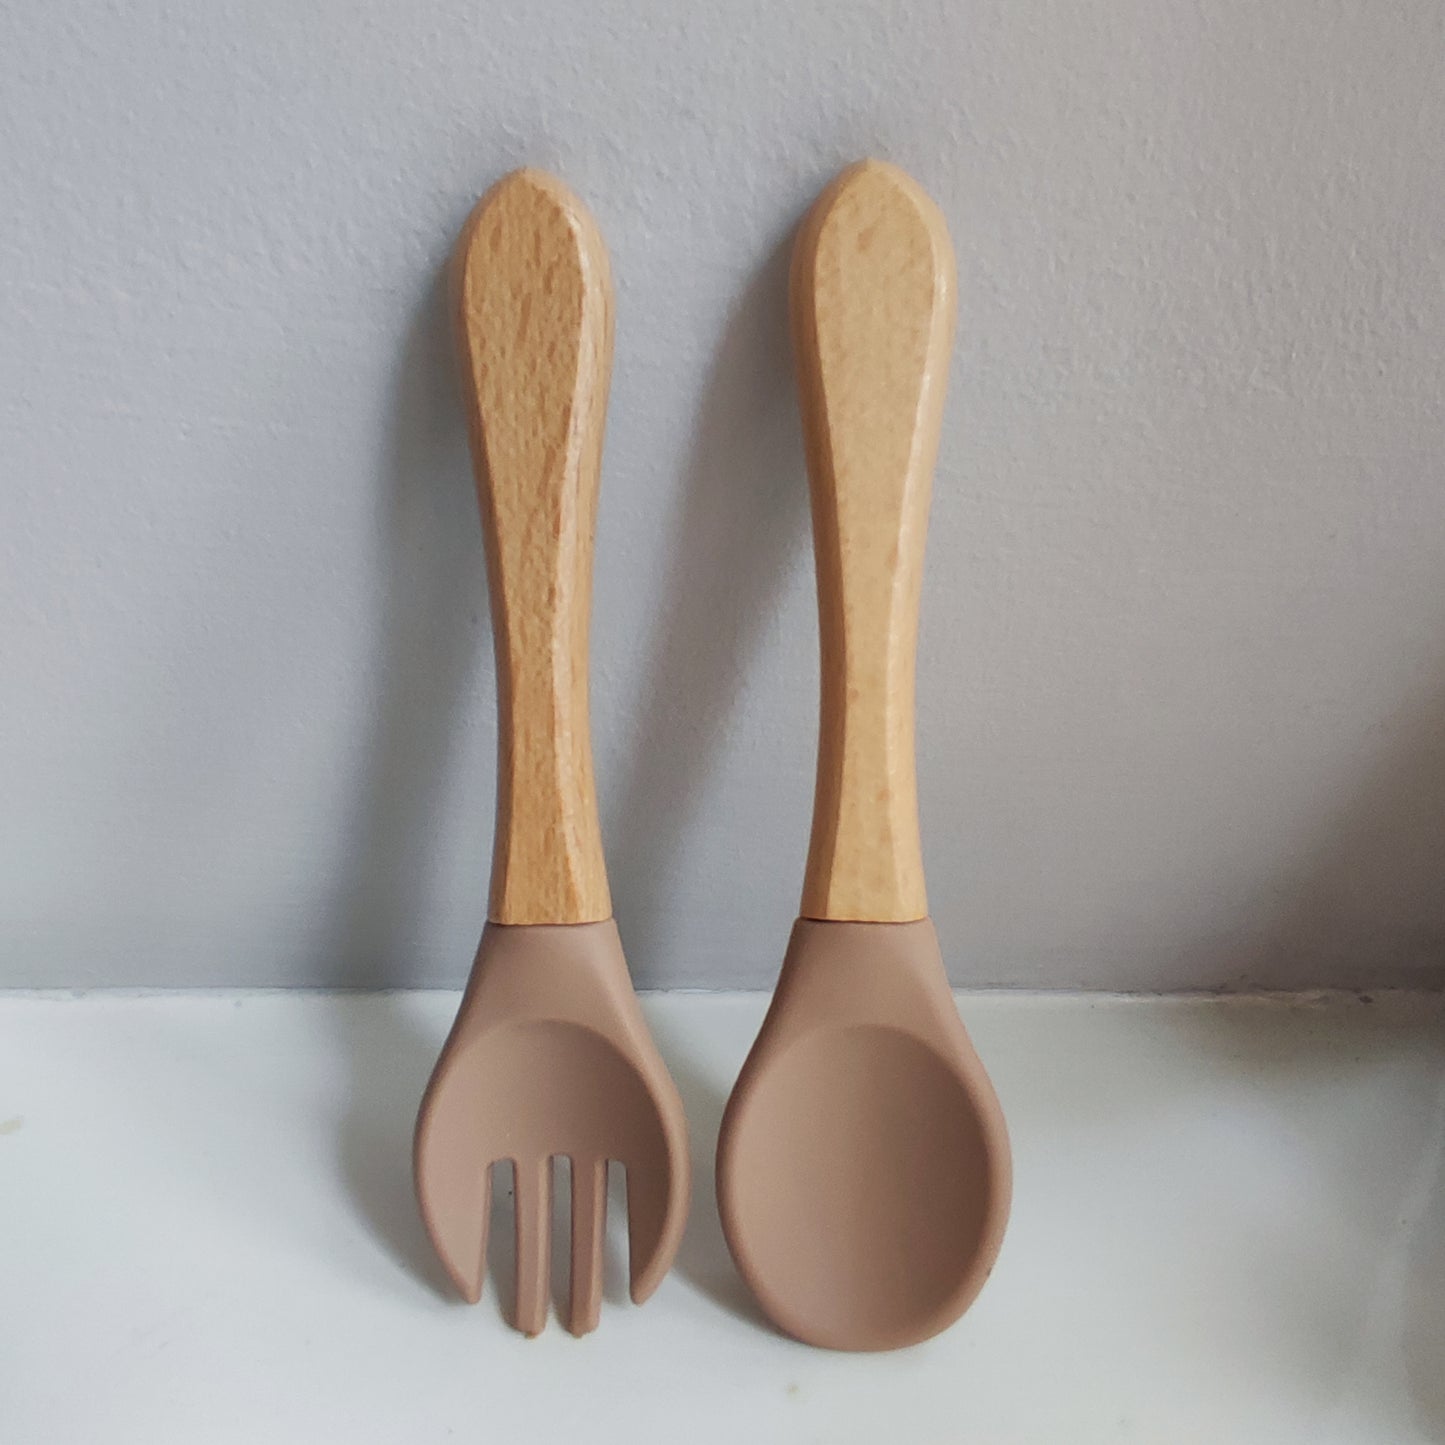 Silicone fork and spoon set